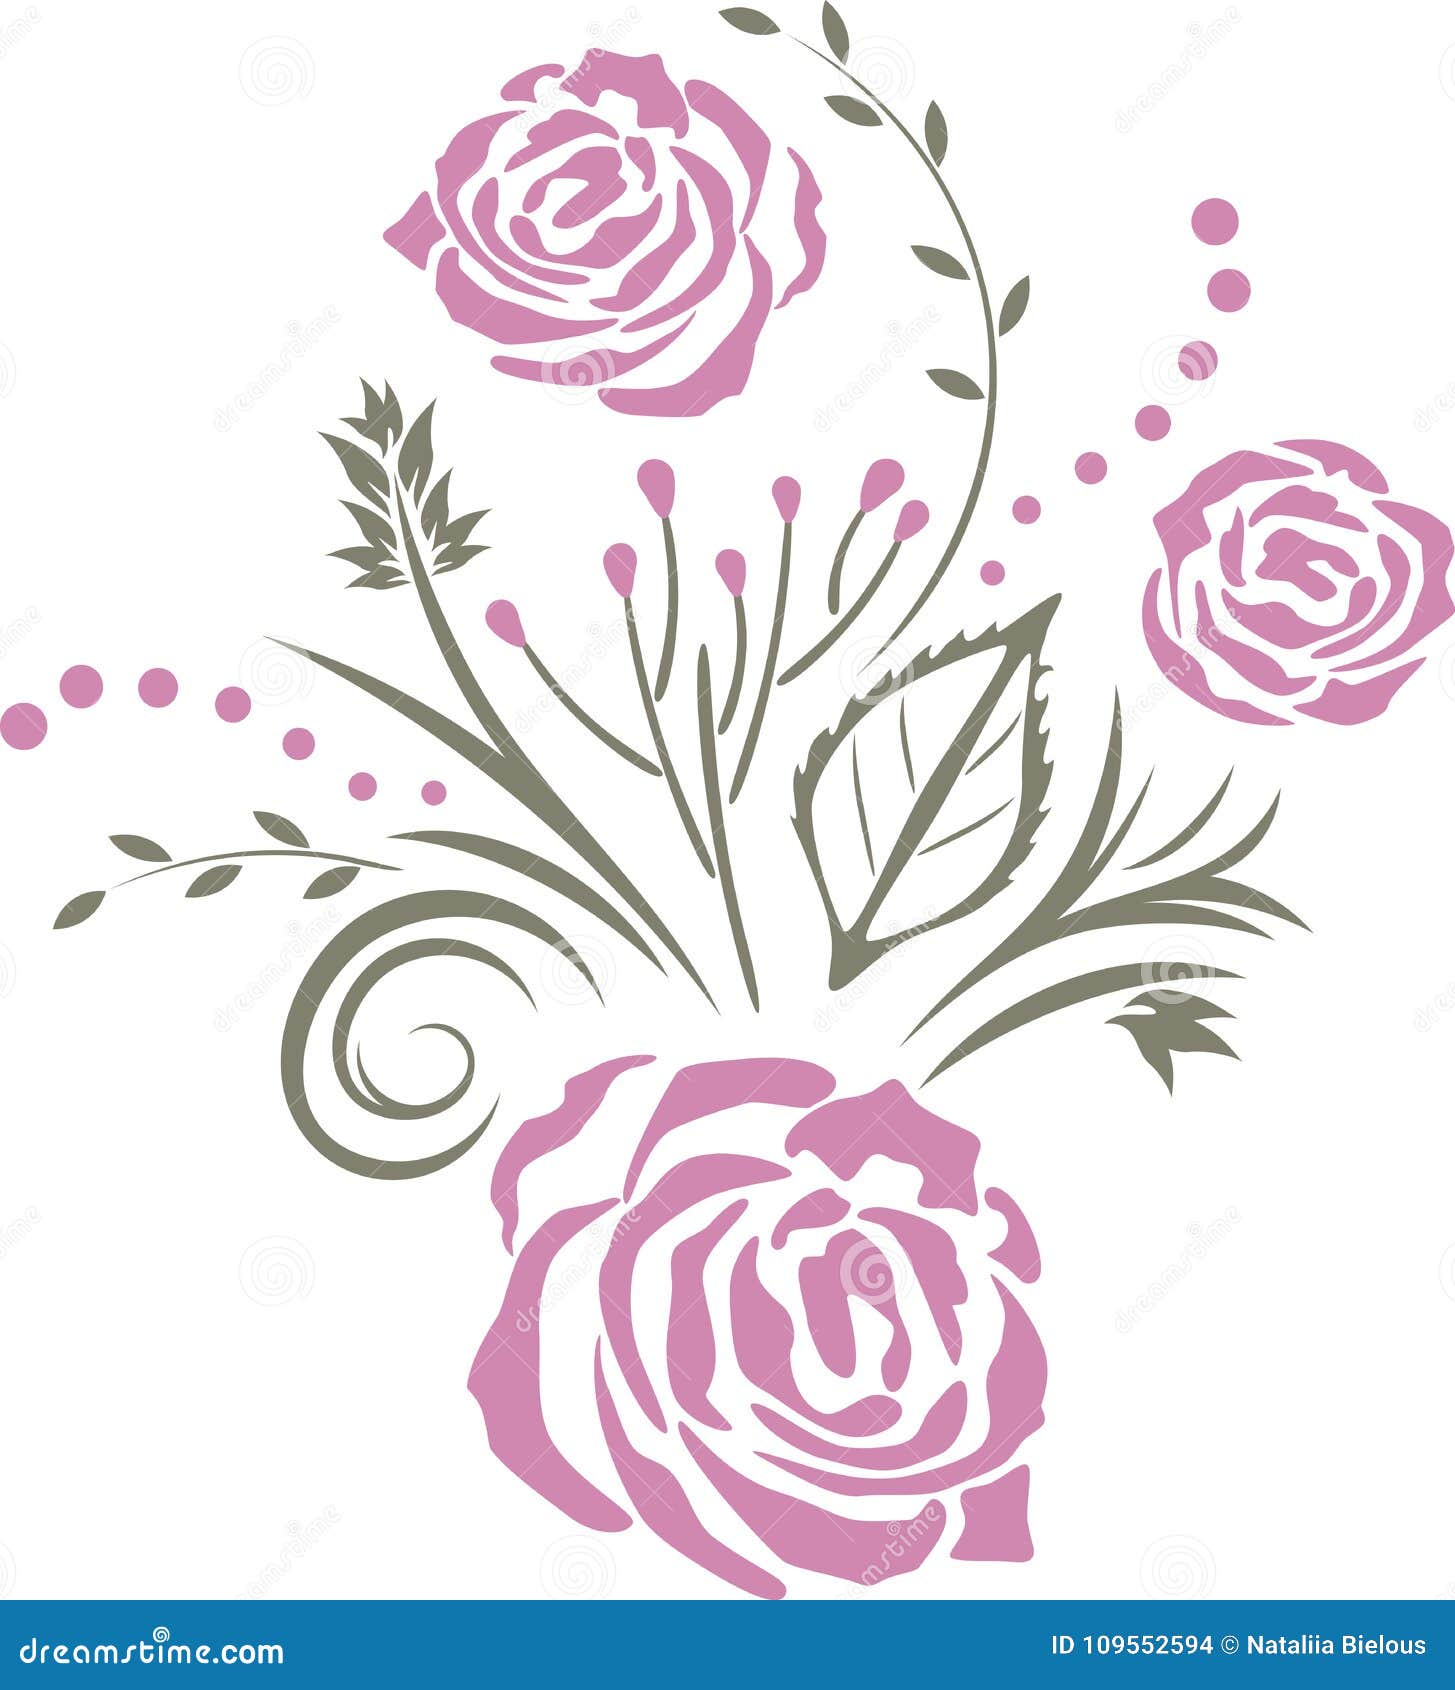 Decorative Element With Purple Stylized Roses Stock Vector